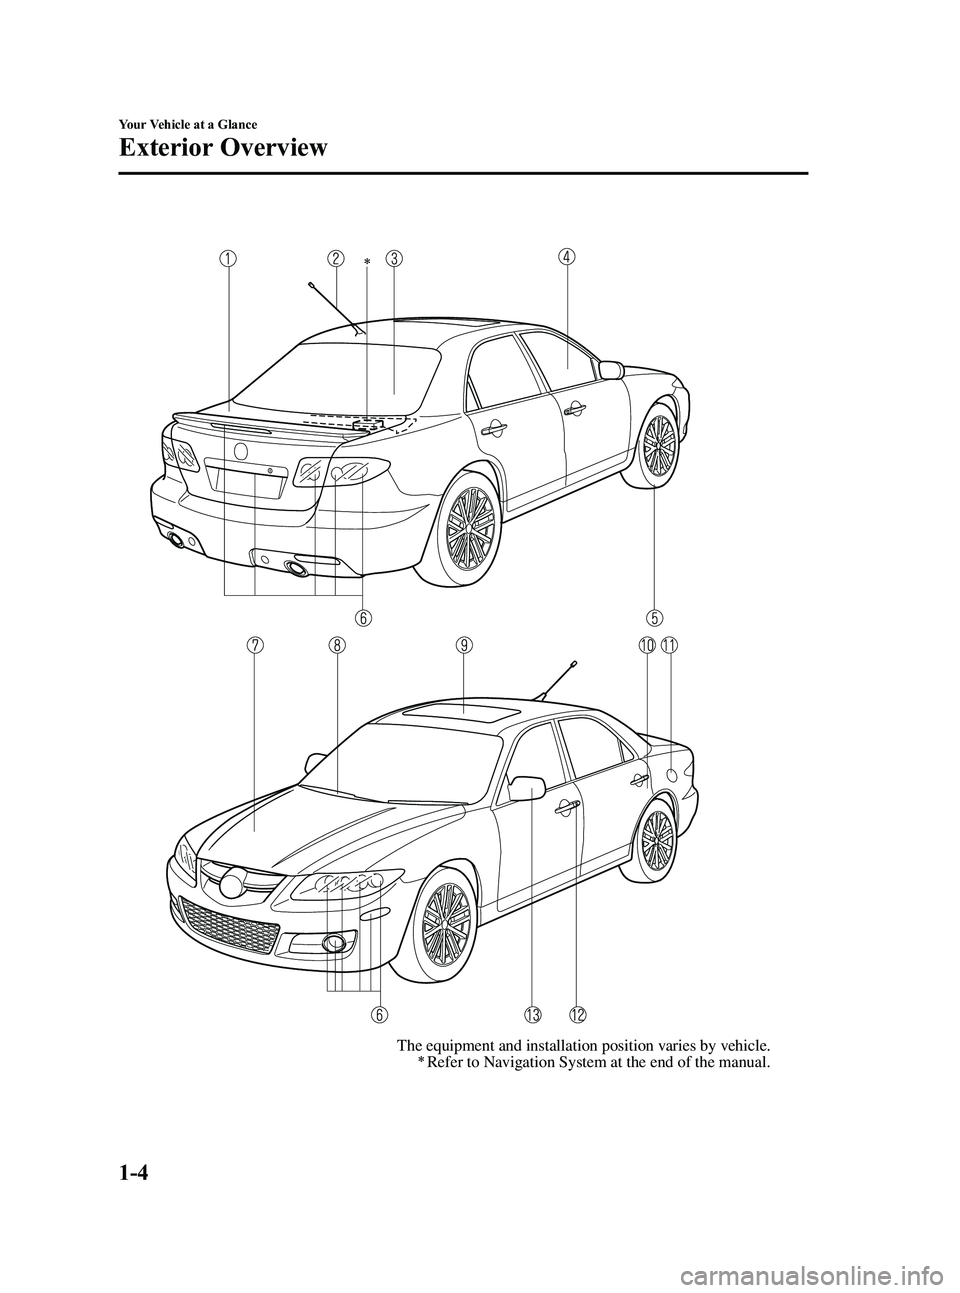 MAZDA MODEL SPEED 6 2006  Owners Manual Black plate (10,1)
The equipment and installation position varies by vehicle.Refer to Navigation System at the end of the manual.
1-4
Your Vehicle at a Glance
Exterior Overview
Mazdaspeed6_8U01-EA-05H